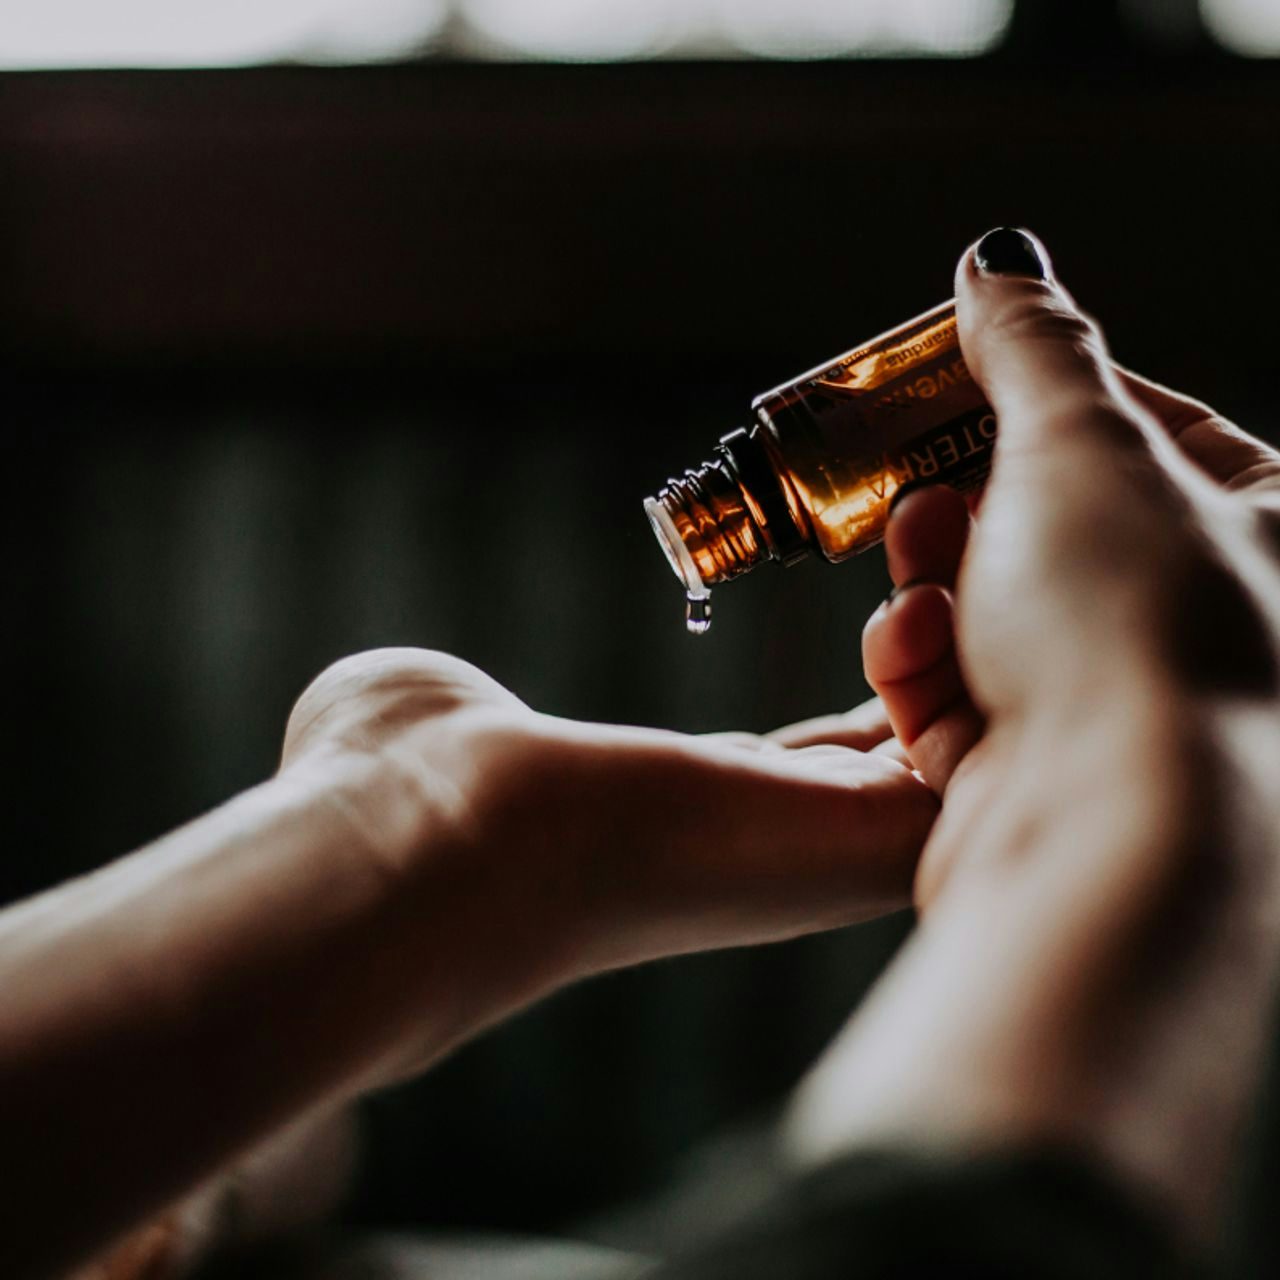 Close-up of hands using a dropper to apply essential oil from an amber bottle, with a focus on a single drop, in a serene setting suggestive of wellness and self-care.